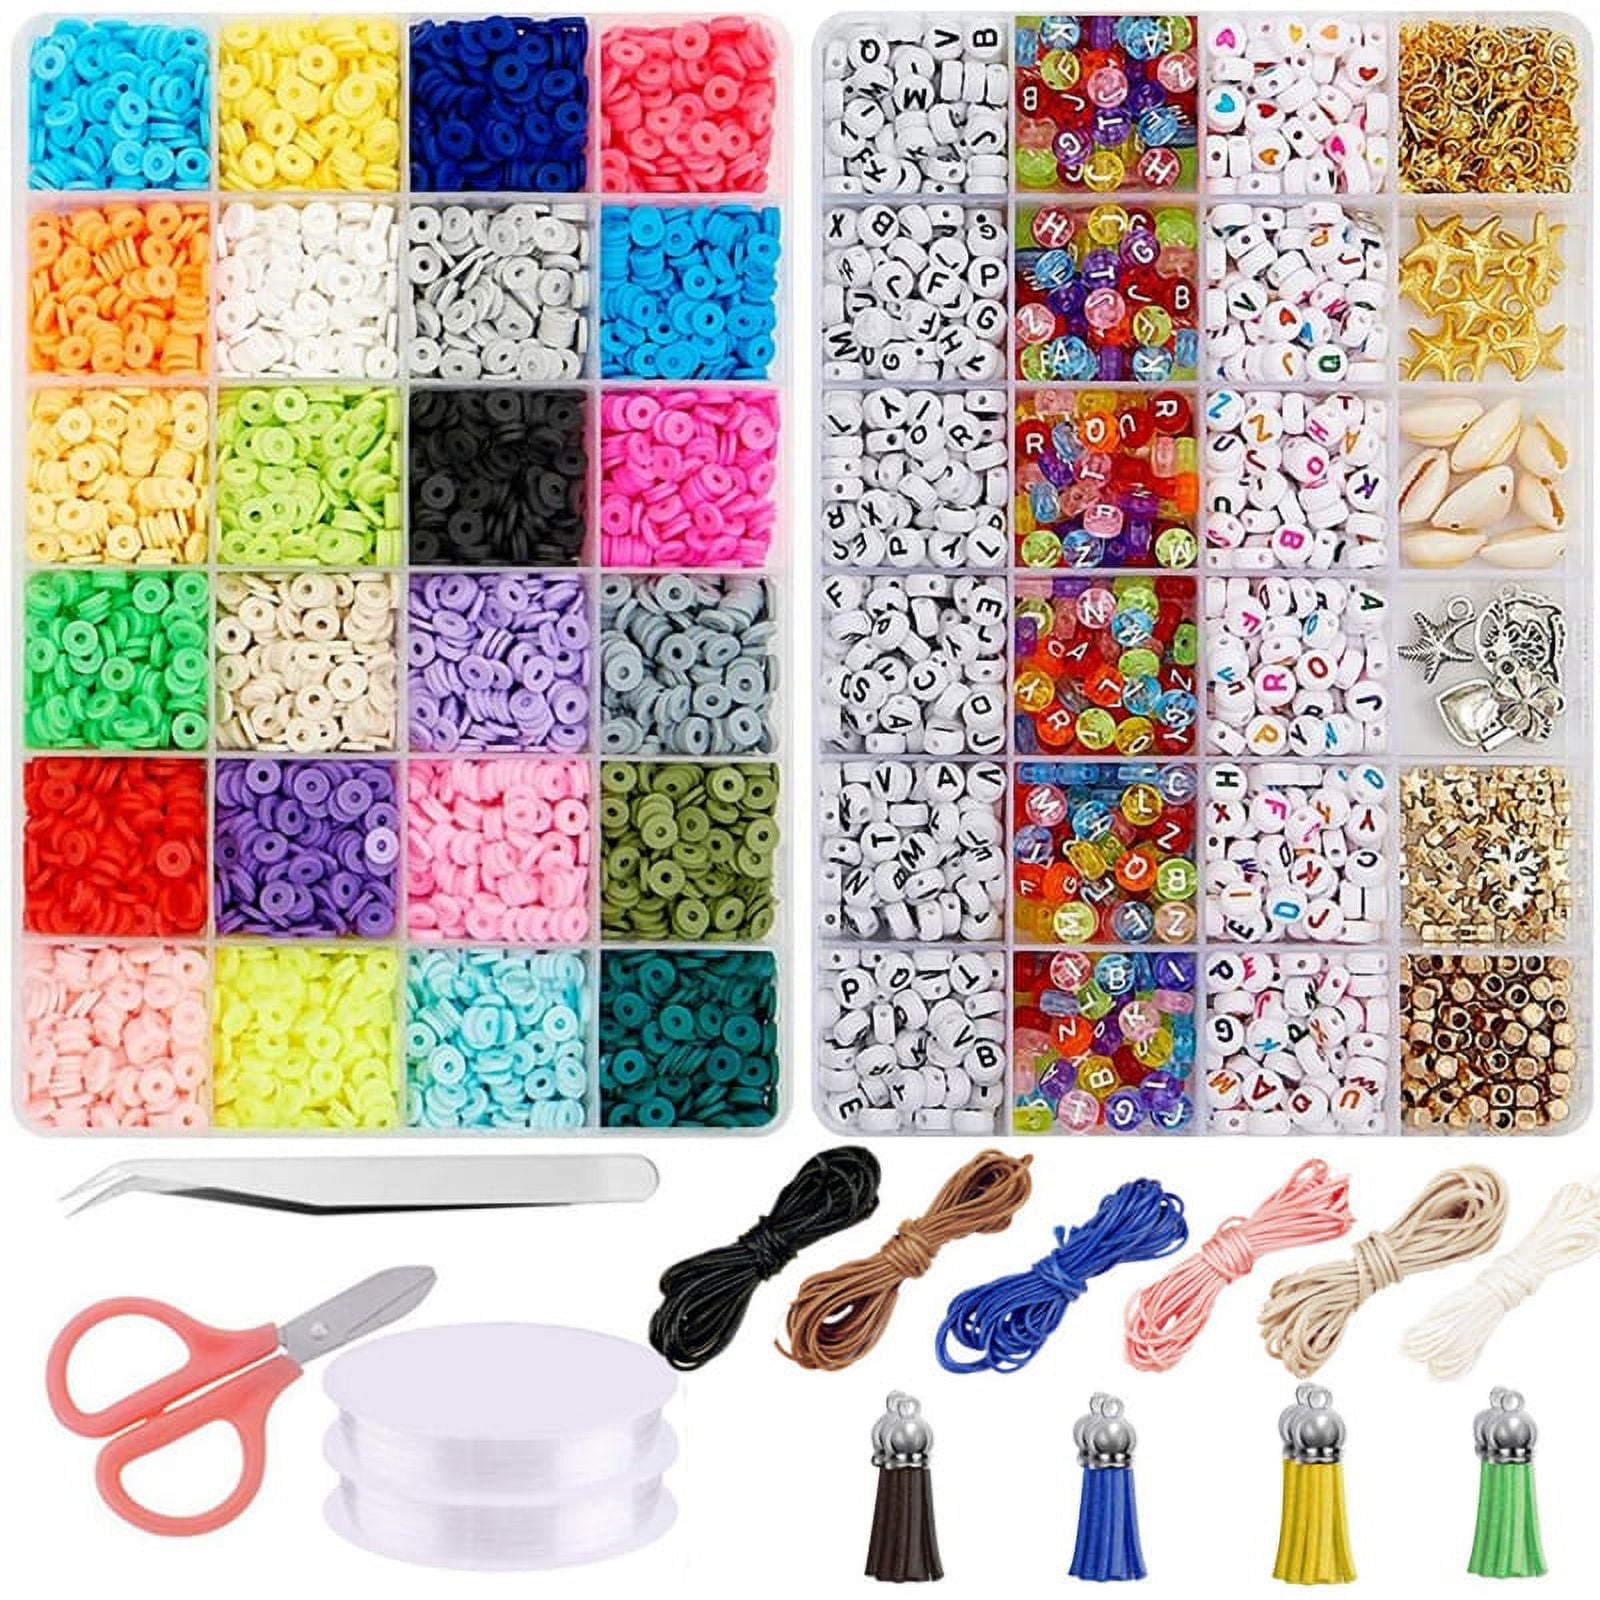 Polymer Clay Beads for Jewelry Making, 18 Colors 6mm Colored Flat